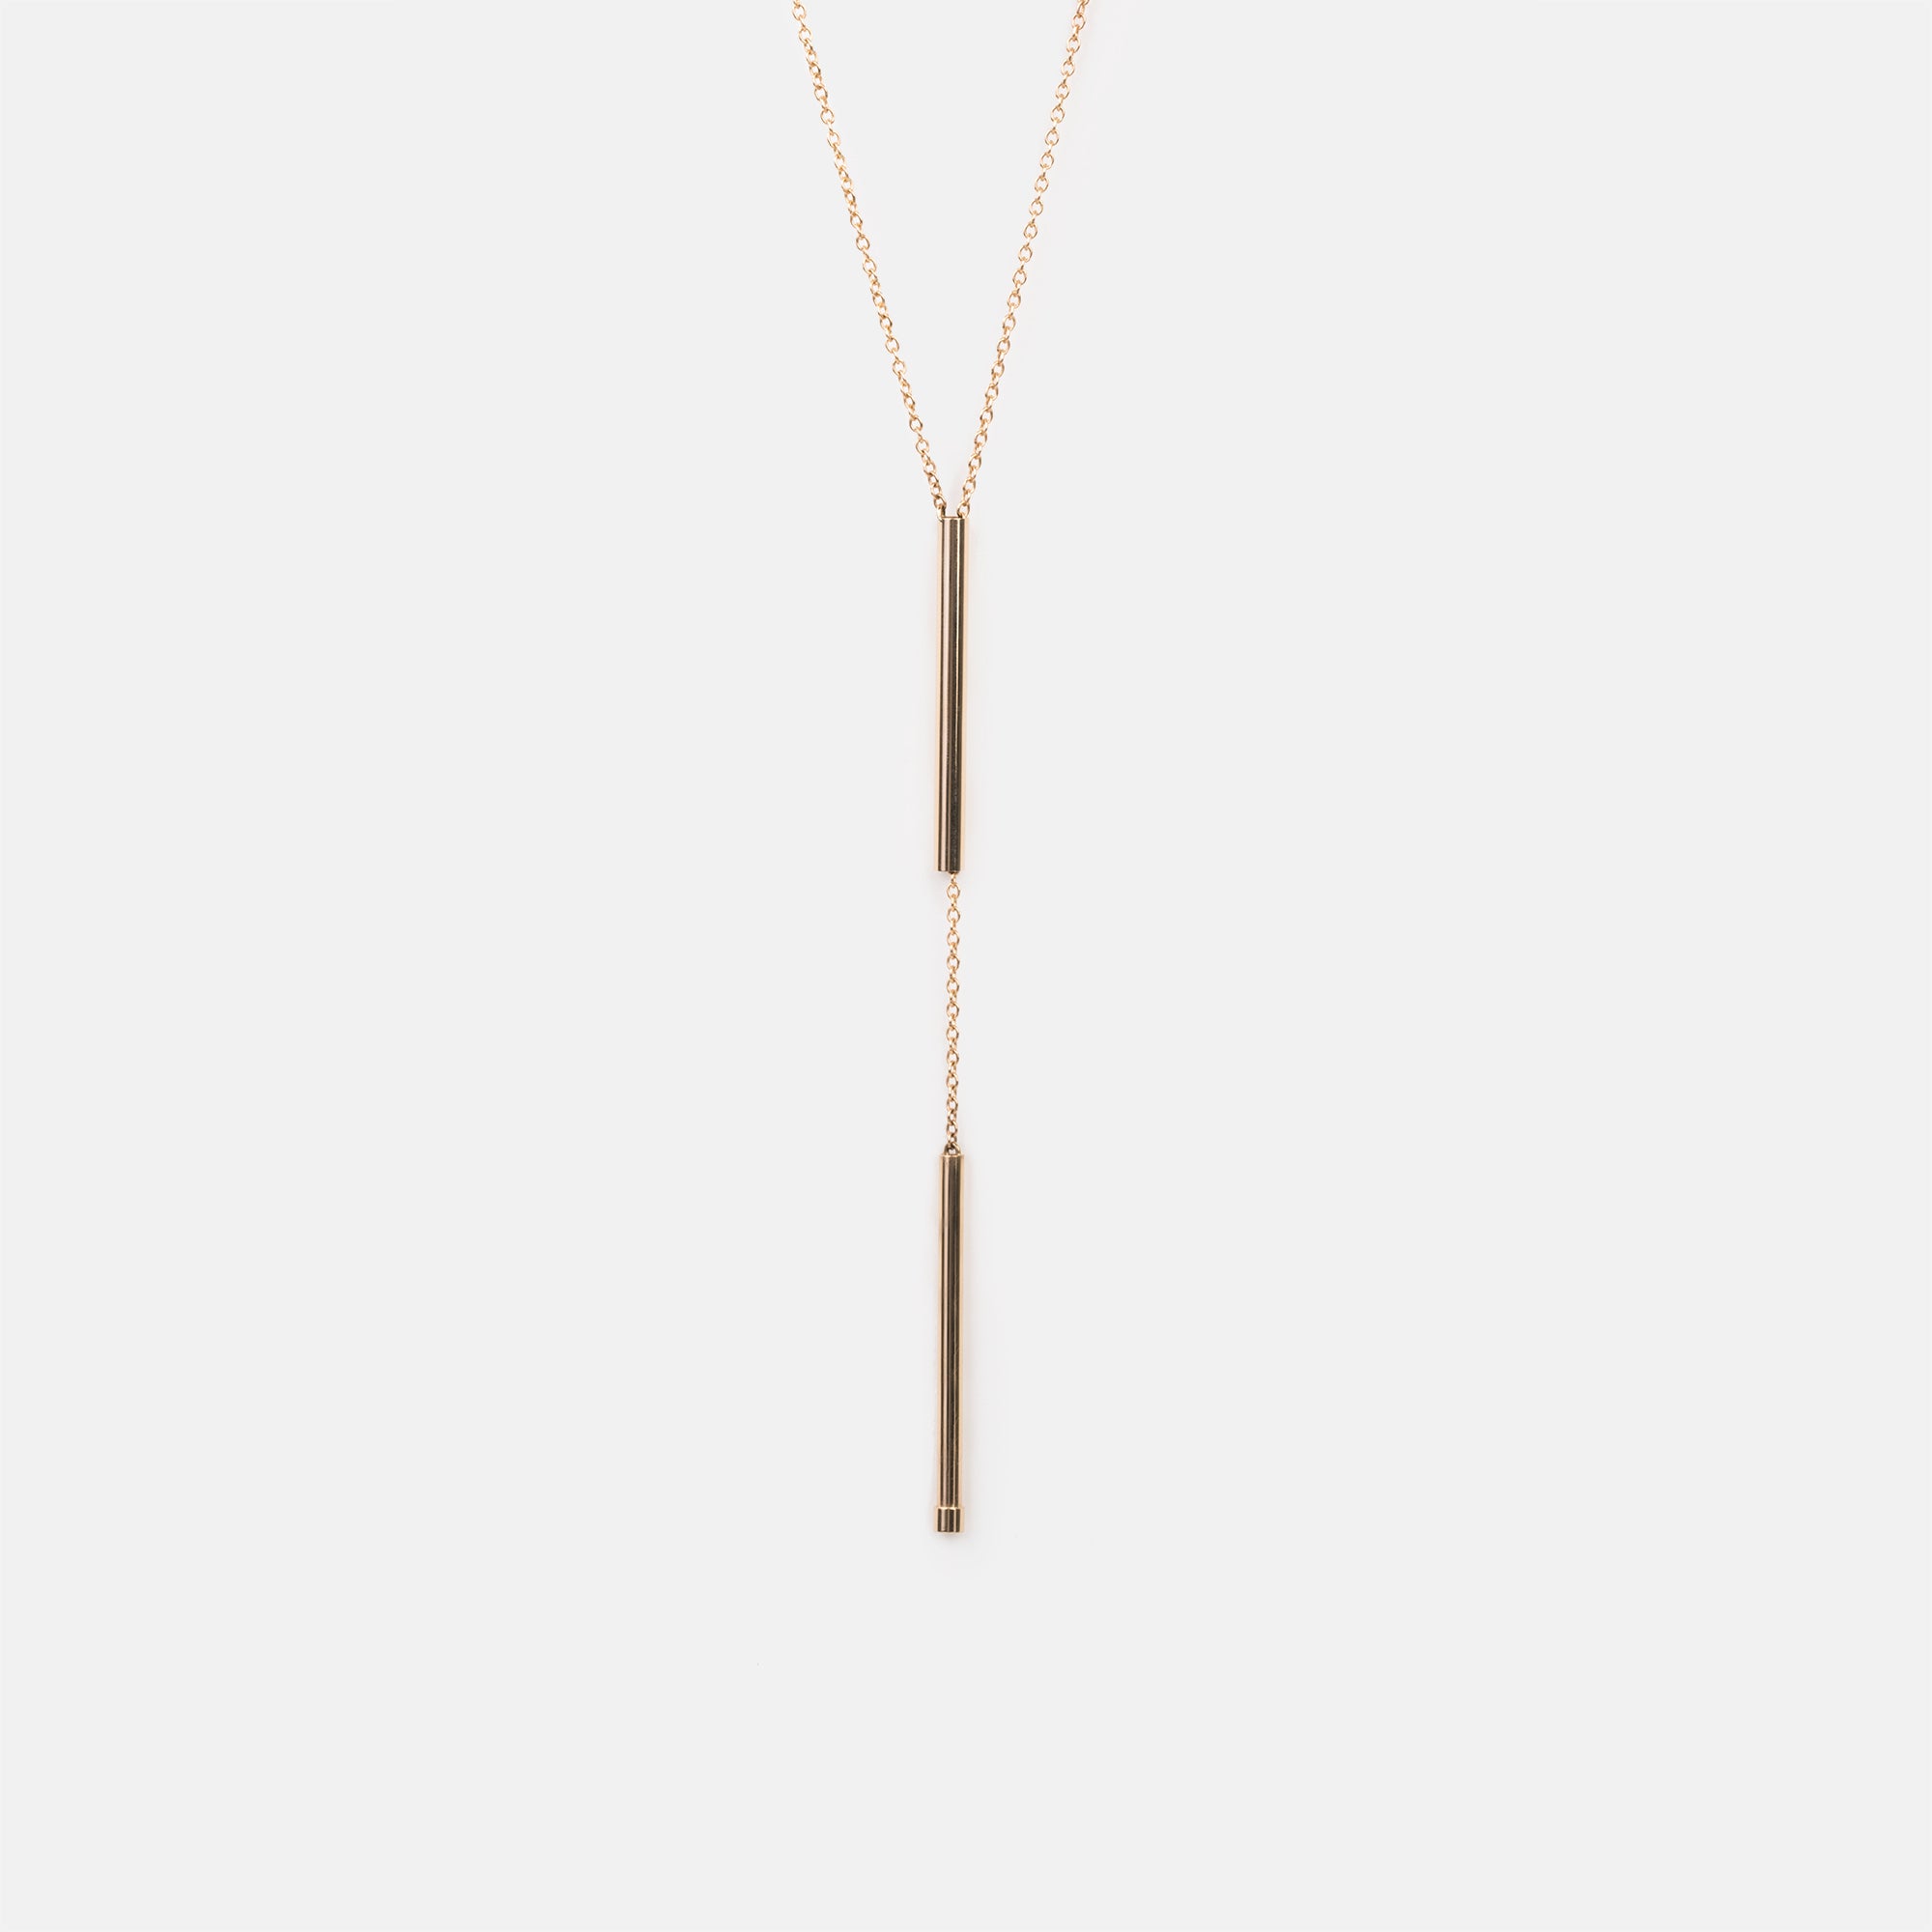 Drasa Designer Necklace in 14k Gold By SHW Fine Jewelry New York City